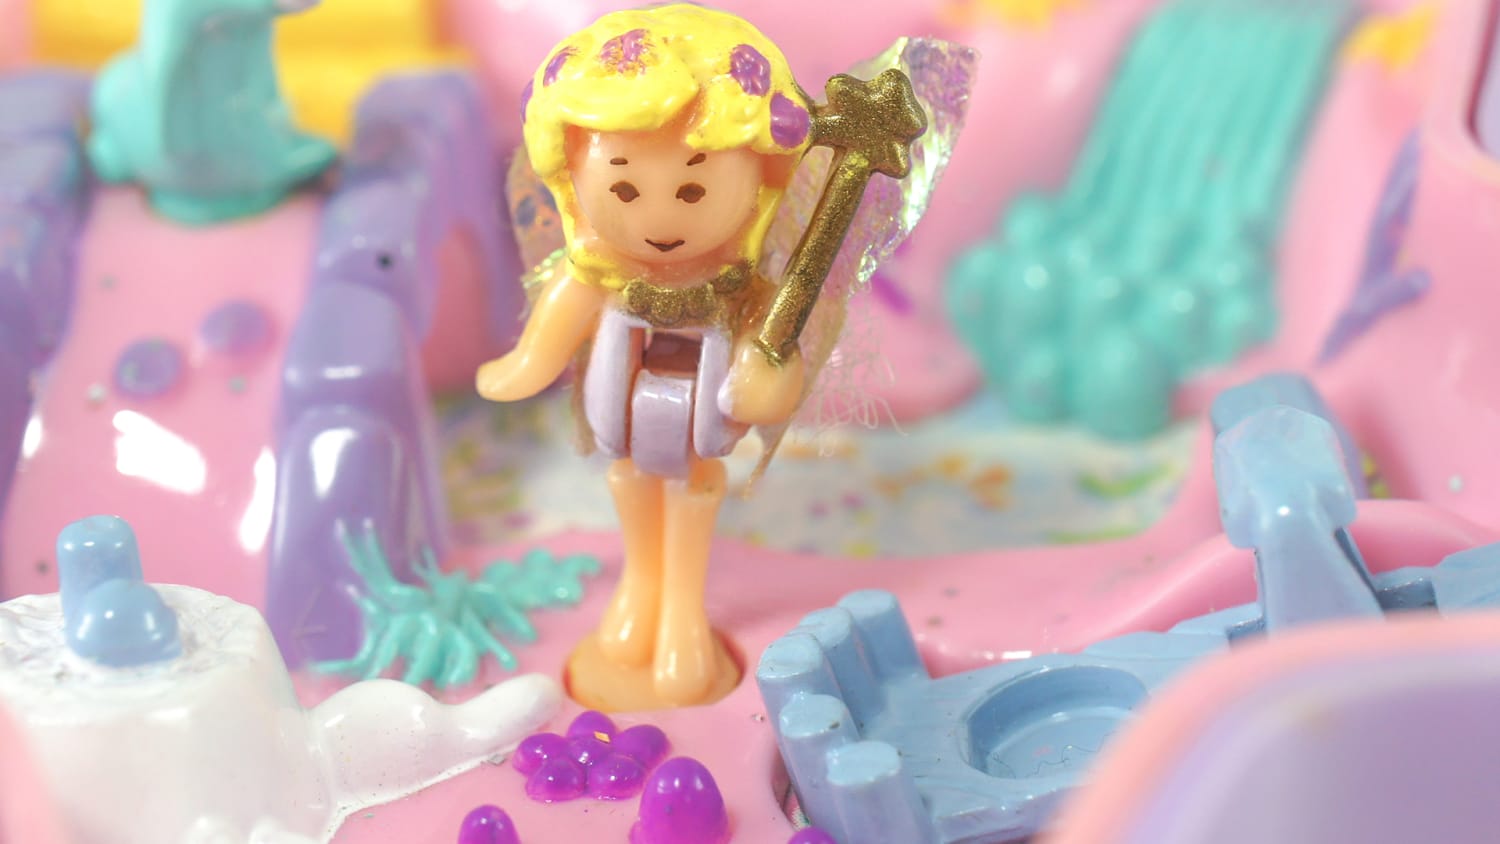 Your old Polly Pocket toys could be worth hundreds of dollars.